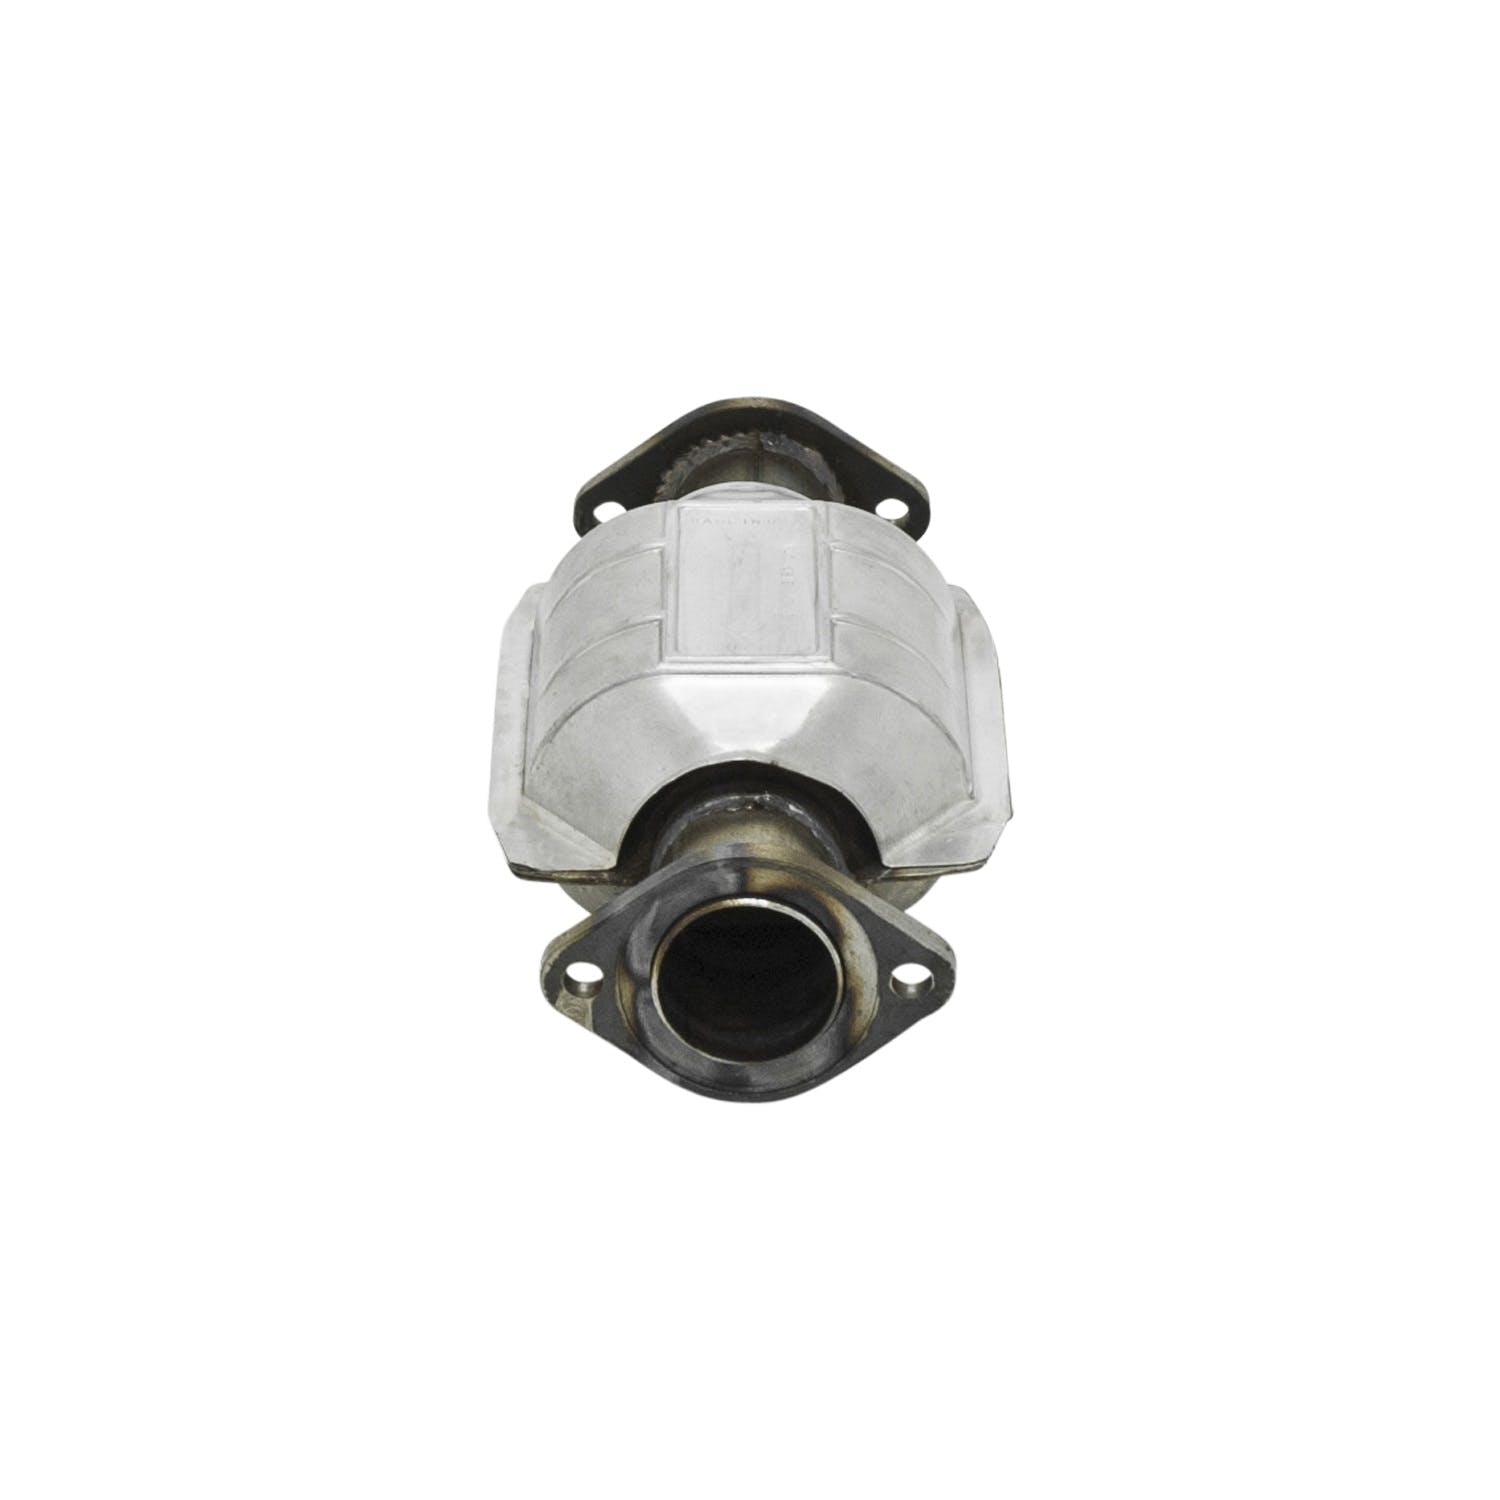 Flowmaster Catalytic Converters 2050001 Catalytic Converter-Direct Fit-2.25 in Inlet/Outlet-49 State